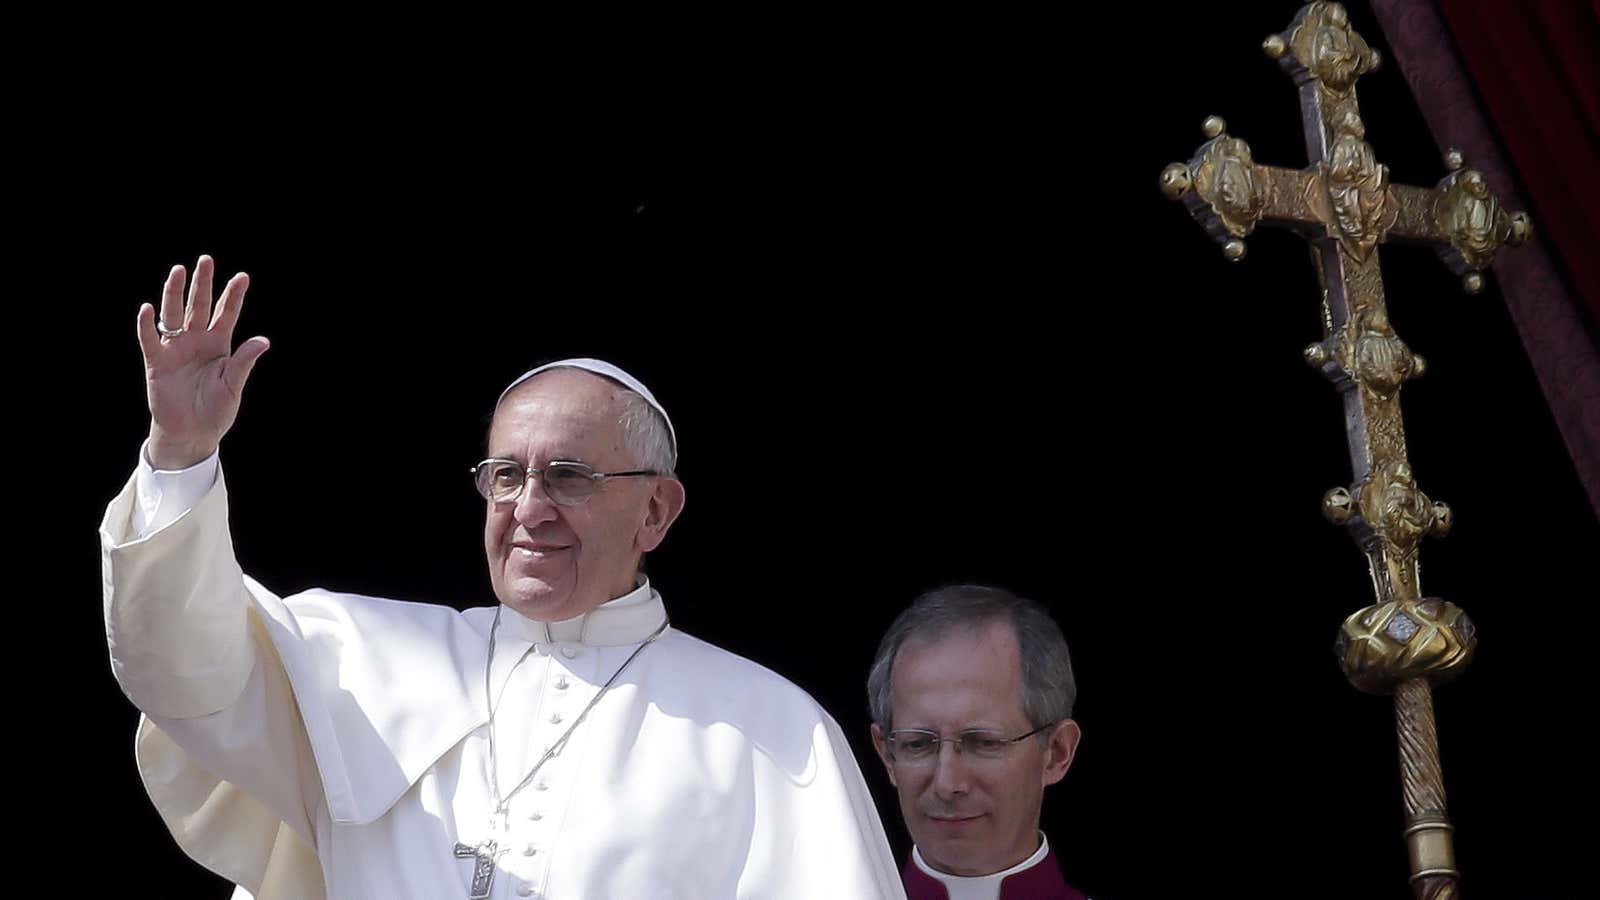 Refugees and terrorism were among the subjects of Pope Francis’s Easter benediction.